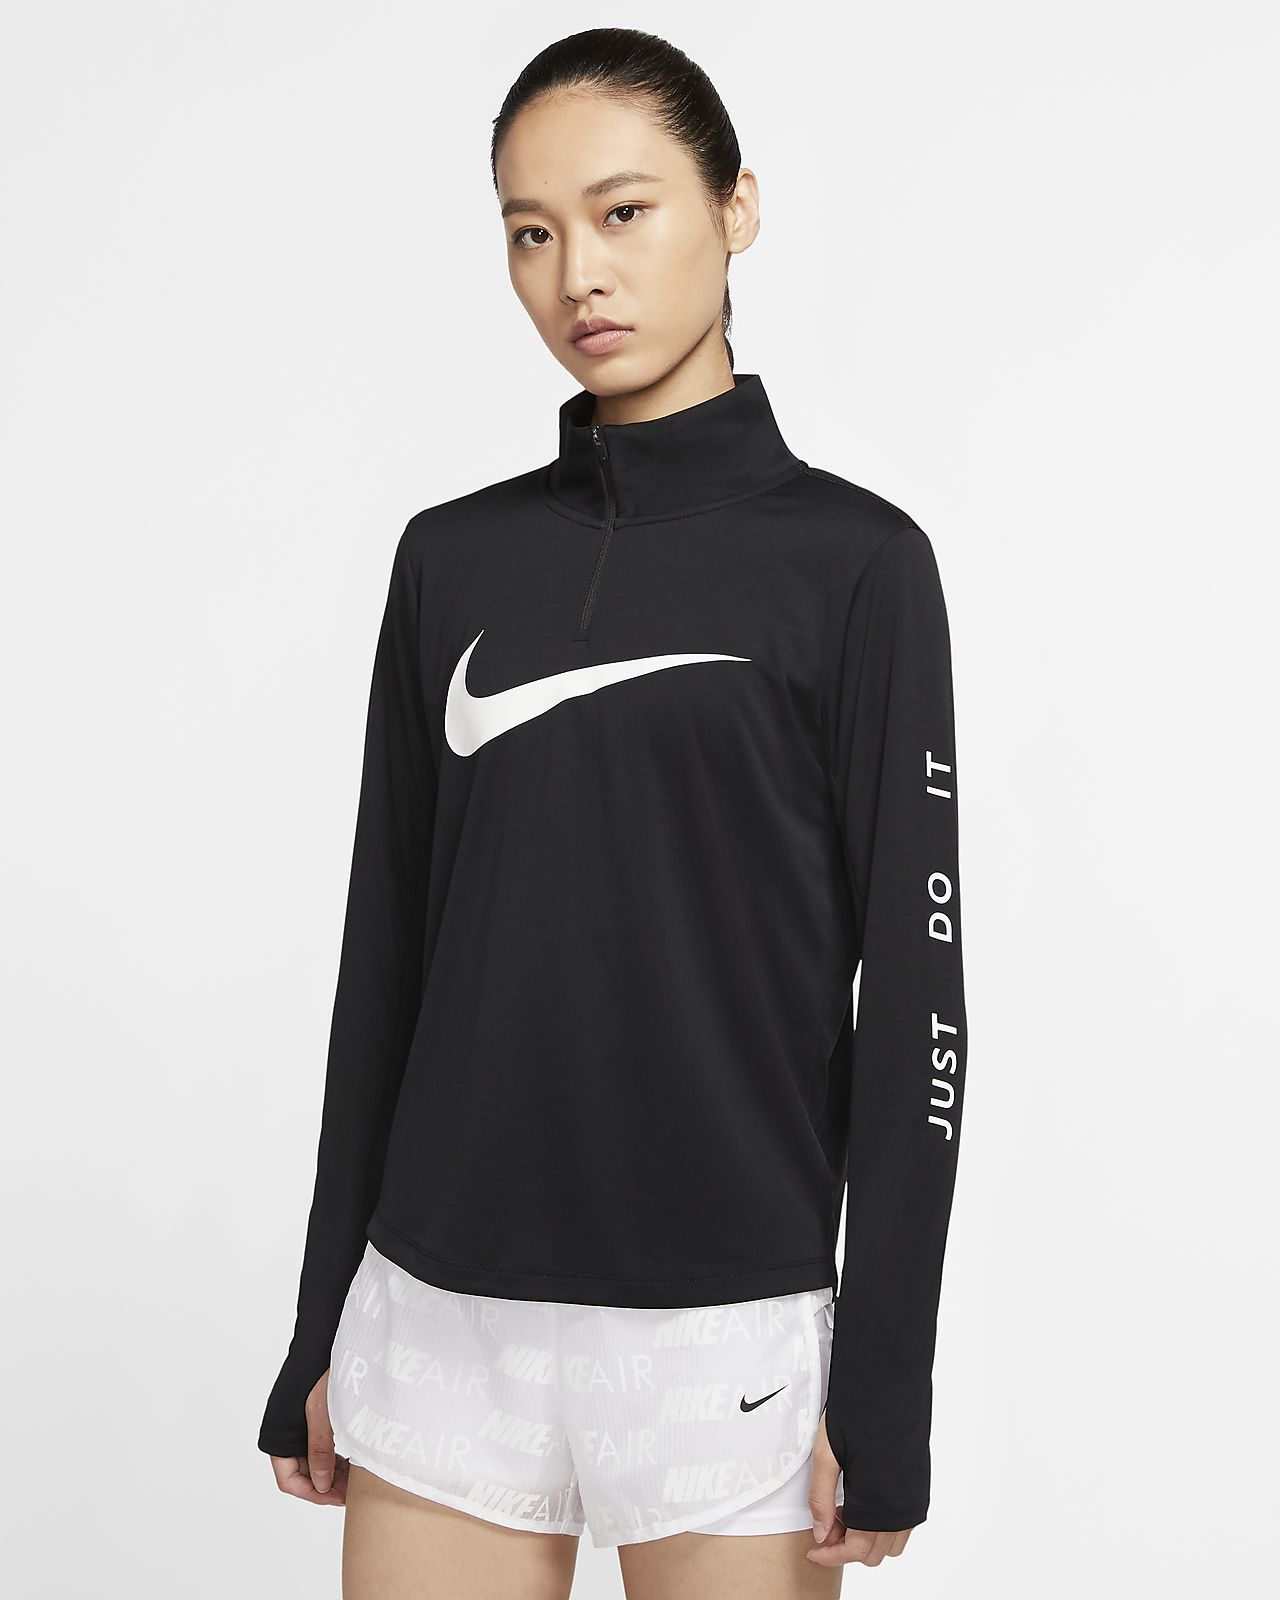 NIKE Official]Nike Women's 1/4-Zip Running Top.Online store (mail order  site)